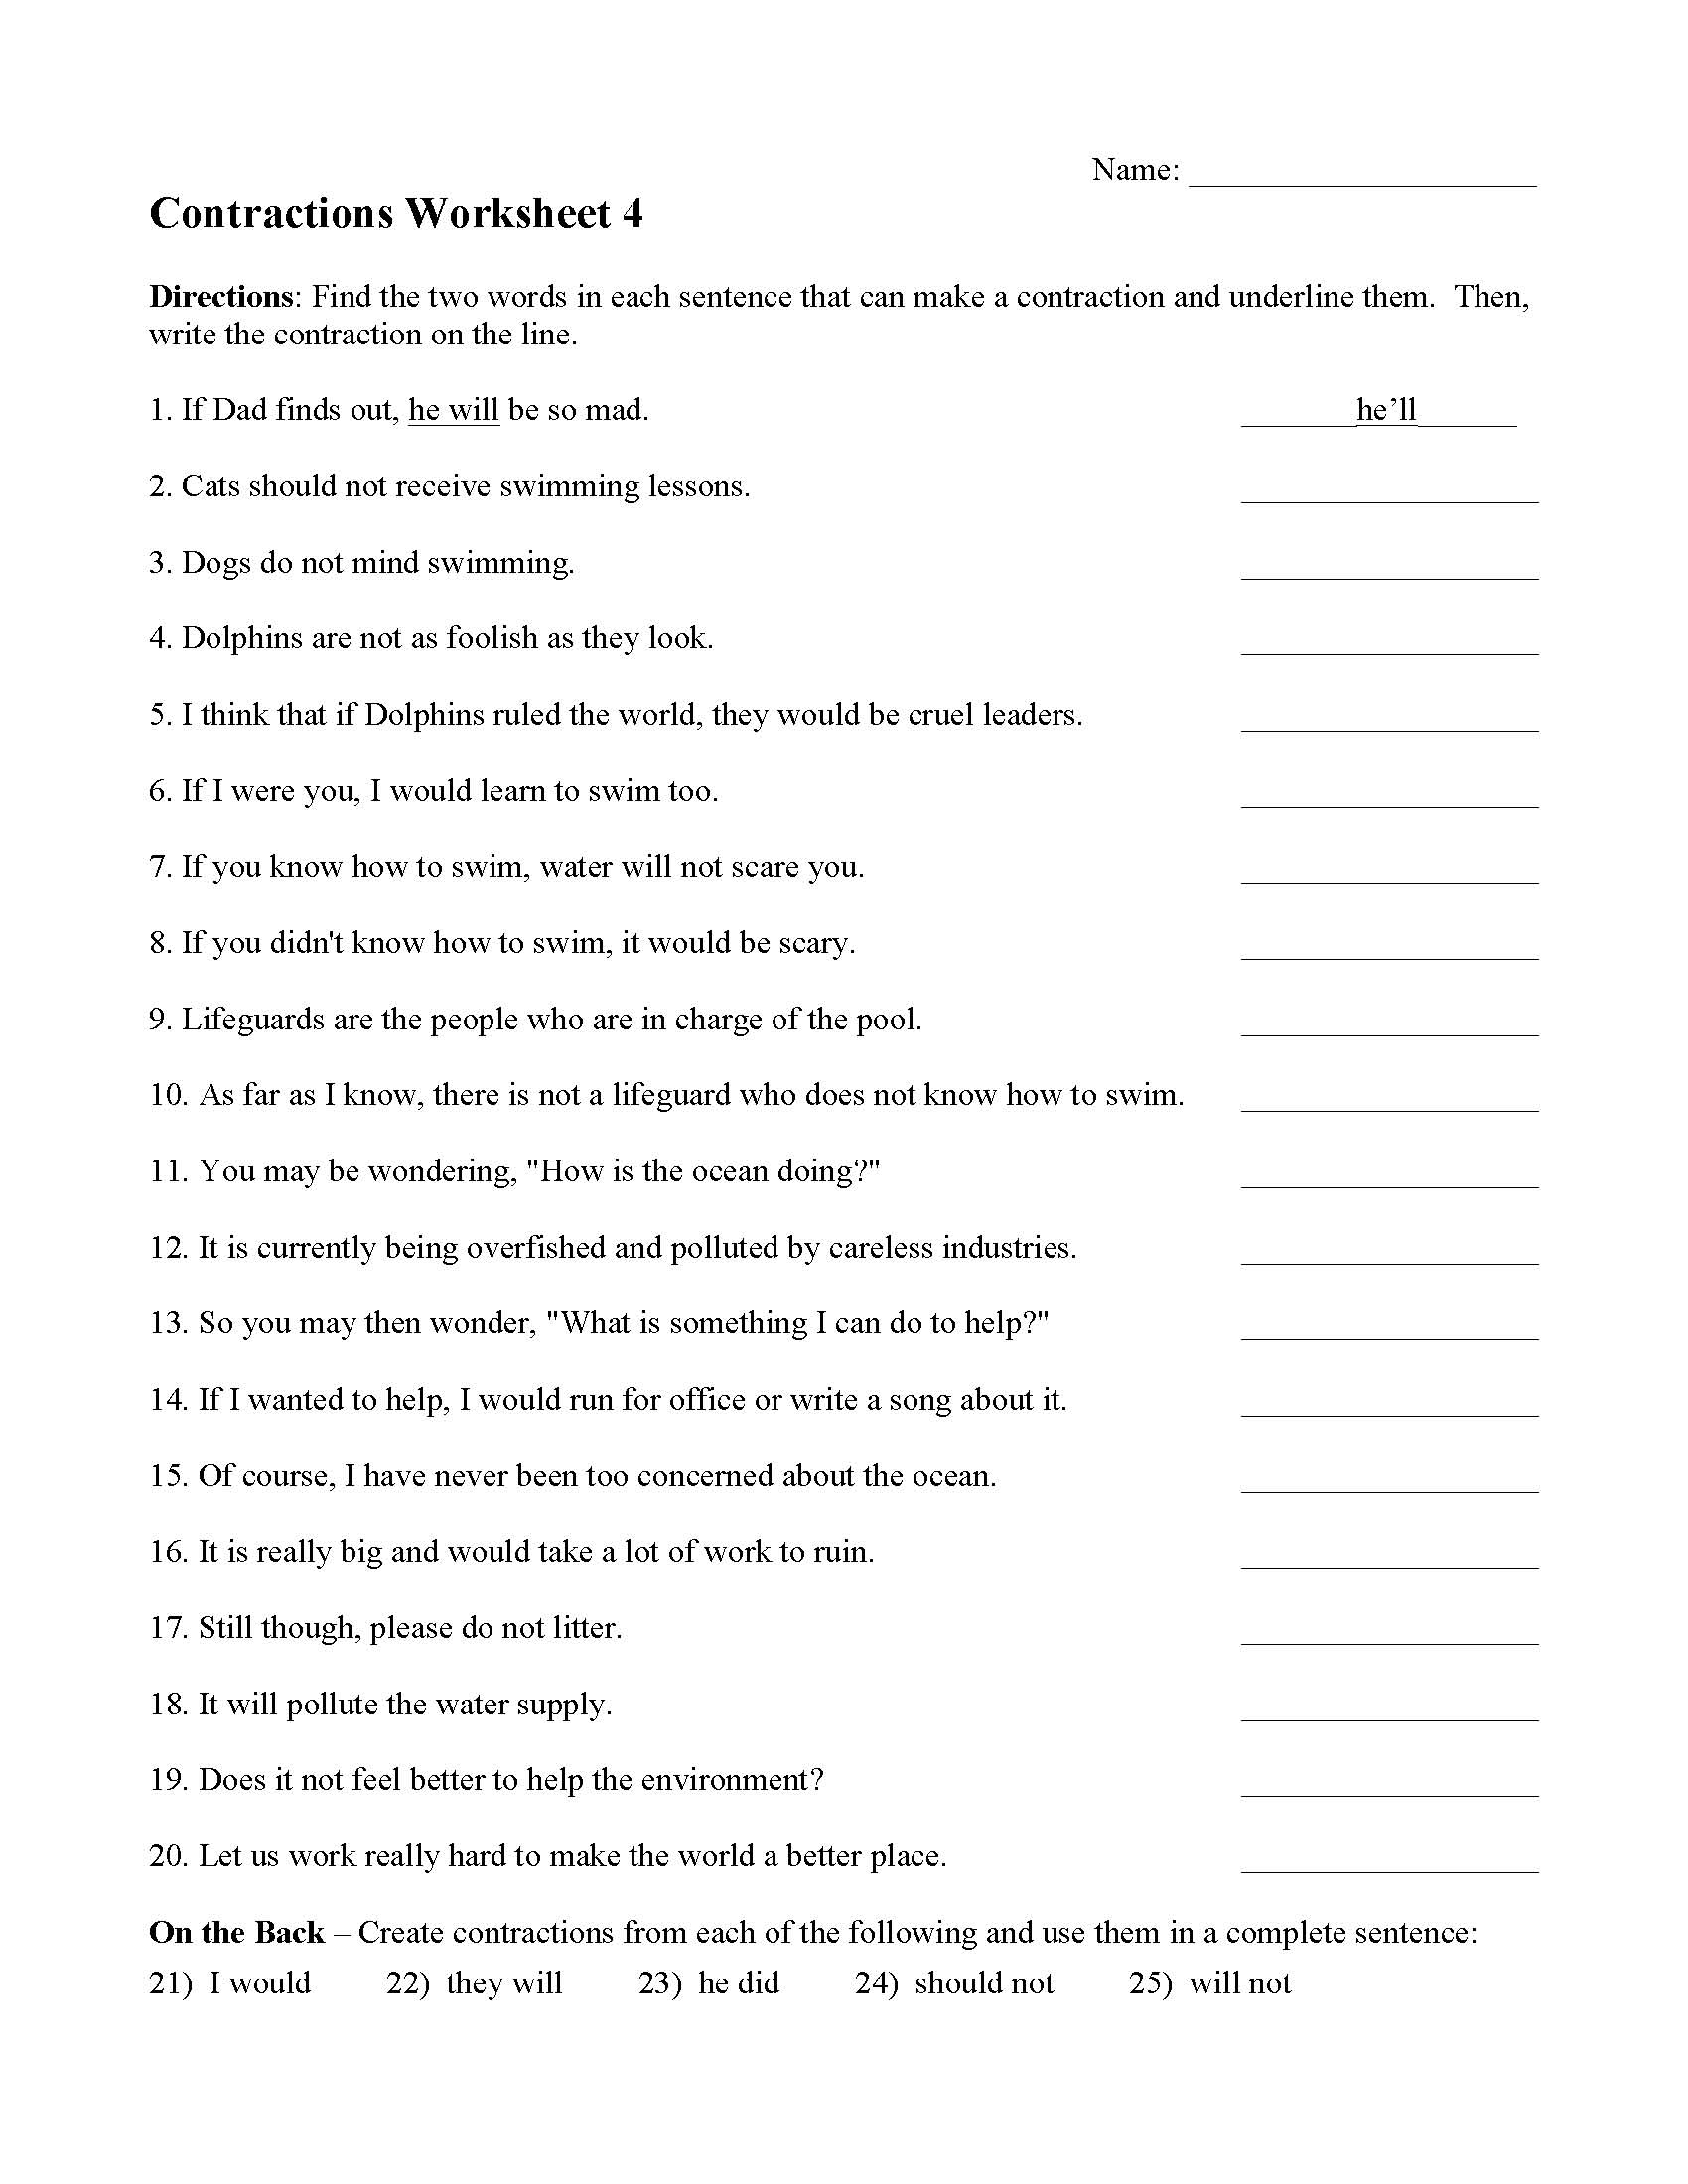 Contractions Worksheet 4 Preview